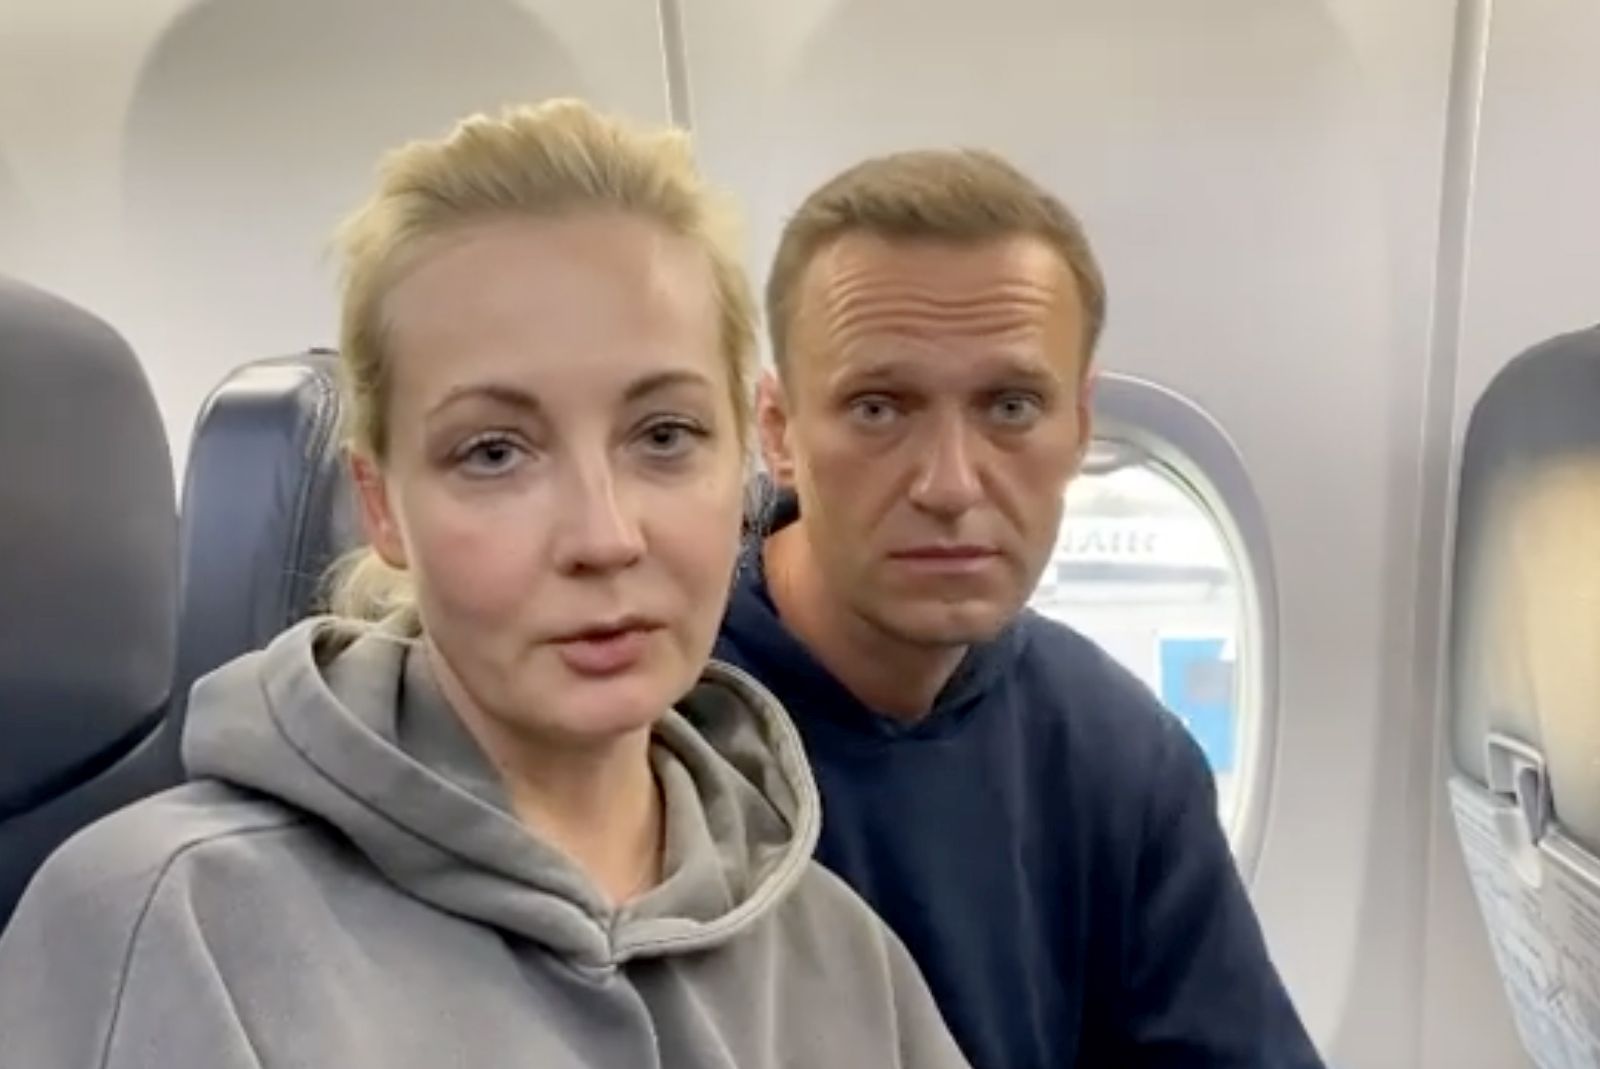 epa08943746 A frame grab of Alexei and Yulia Navalnaya taken from a video posted on the Instagram account @navalny shows Russian opposition Leader Alexei Navalny before his flight at the Berlin Brandenburg International Airport BER in Schoenefeld, Germany, 17 January 2021 Russian opposition leader Alexei Navalny plans to return to Russia on a scheduled flight to Moscow later in the afternoon on 17 January. He was treated at the Charite hospital in Berlin since 22 August 2020 for being poisoned with a nerve agent from the Novichok group and was discharged from acute inpatient care on 22 September 2020.  EPA/ALEXEI NAVALNY INSTAGRAM